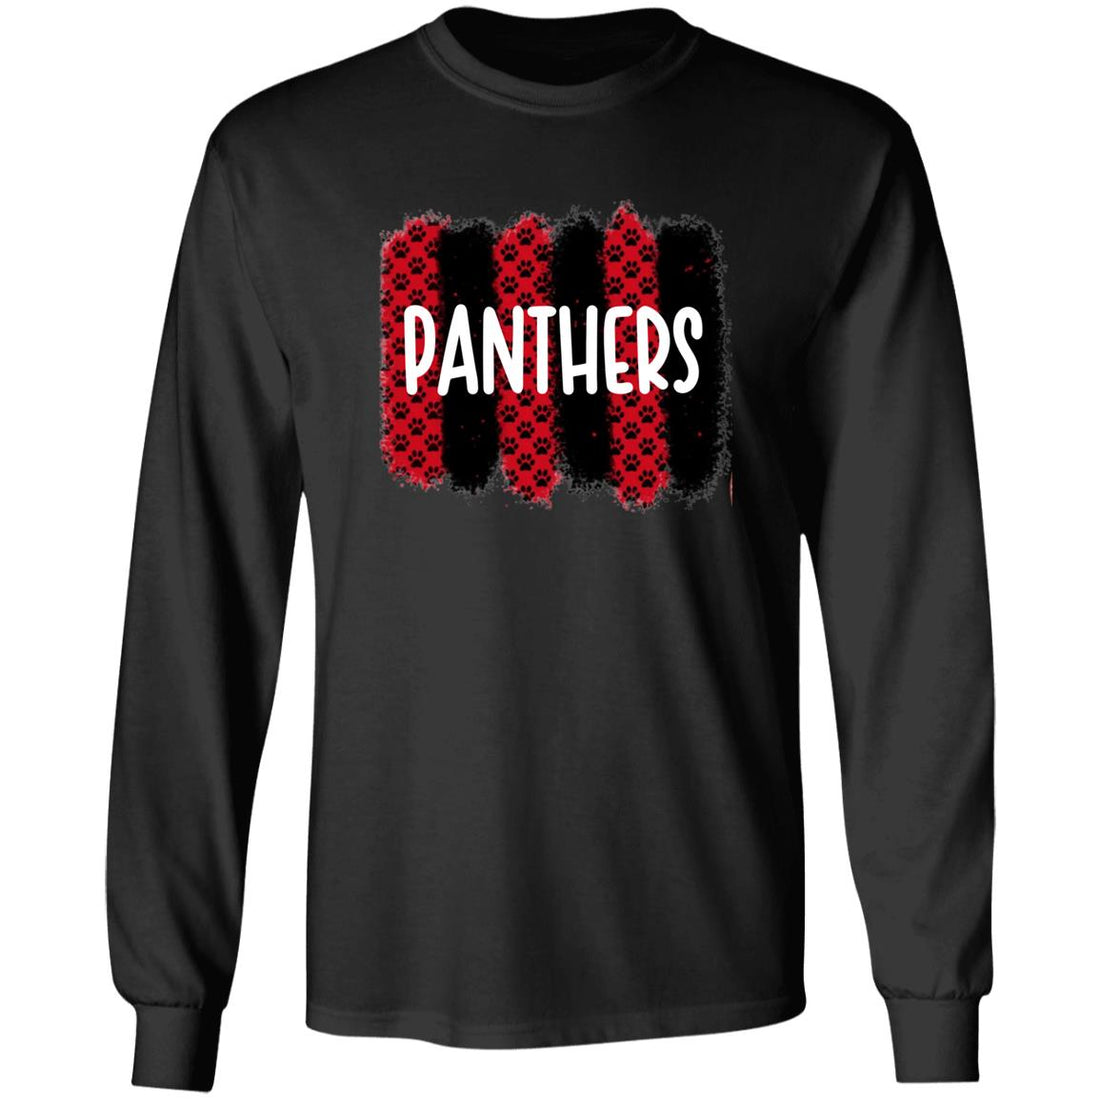 Panthers Paw Tracks Long Sleeve Ultra Cotton T-Shirt - T-Shirts - Positively Sassy - Panthers Paw Tracks Long Sleeve Ultra Cotton T-Shirt